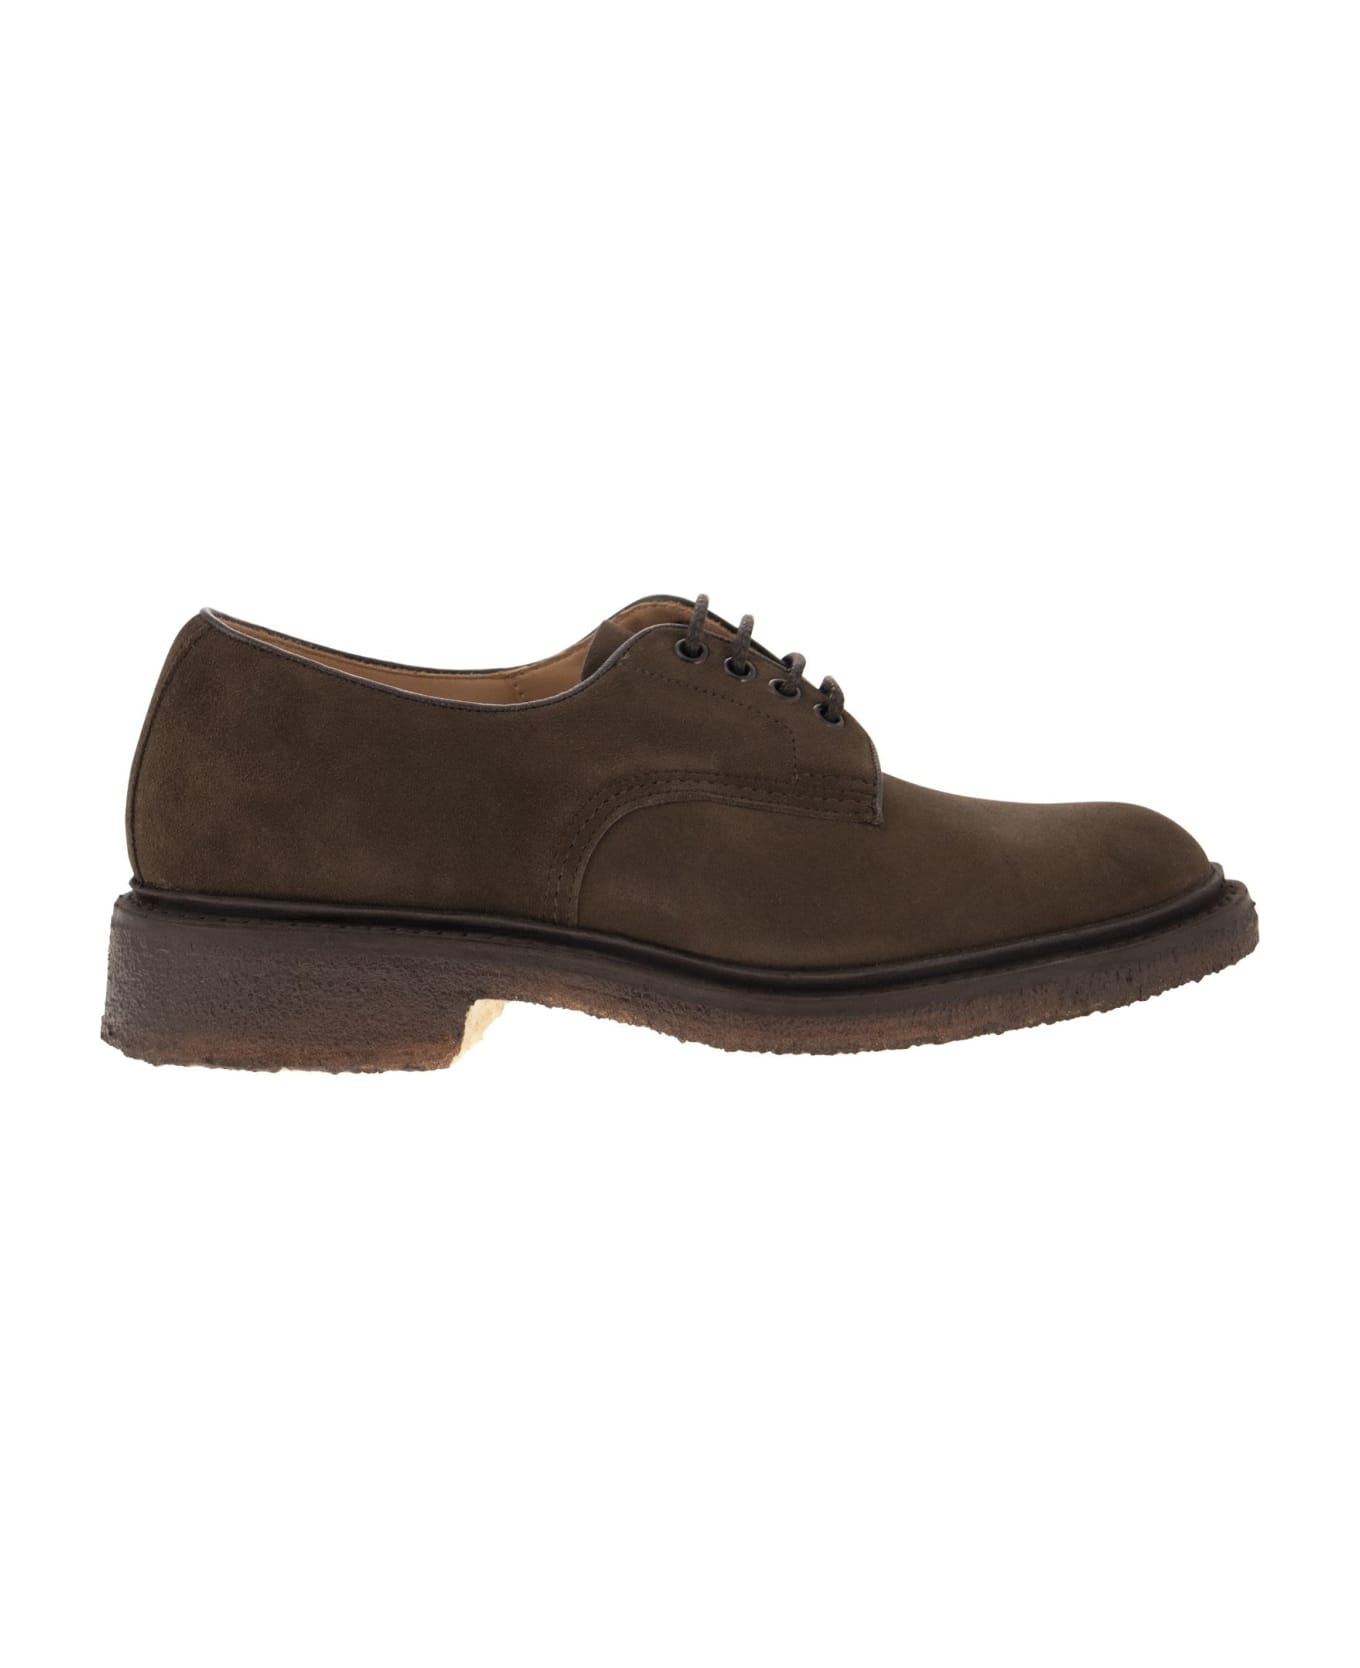 Tricker's Daniel - Suede Leather Lace-up - Brown ローファー＆デッキシューズ